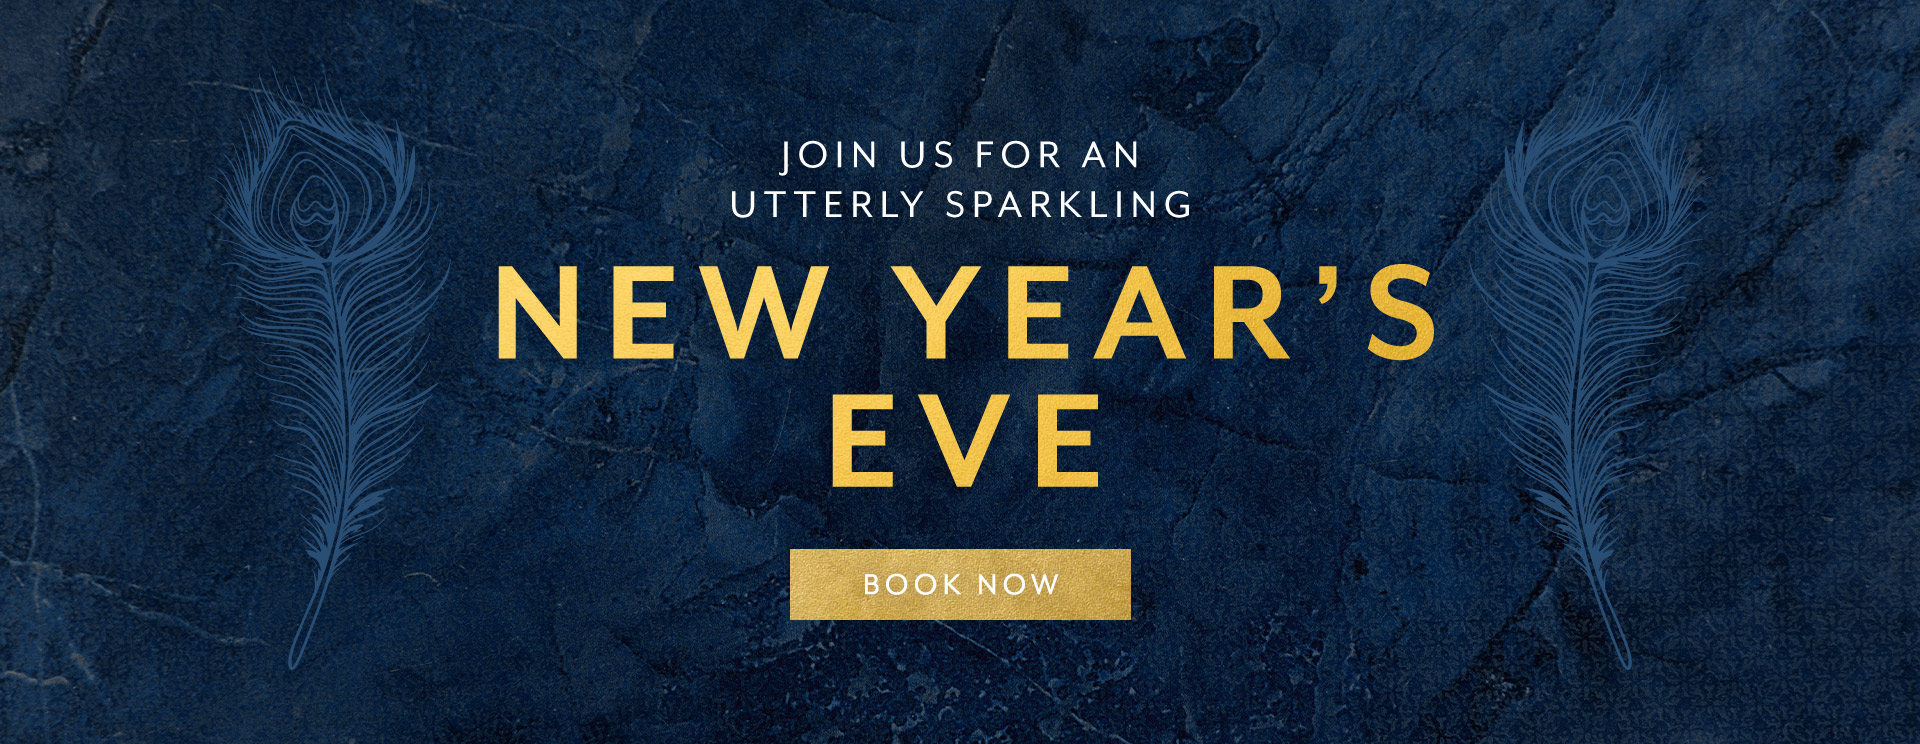 New Year's Eve at The Chilworth Arms